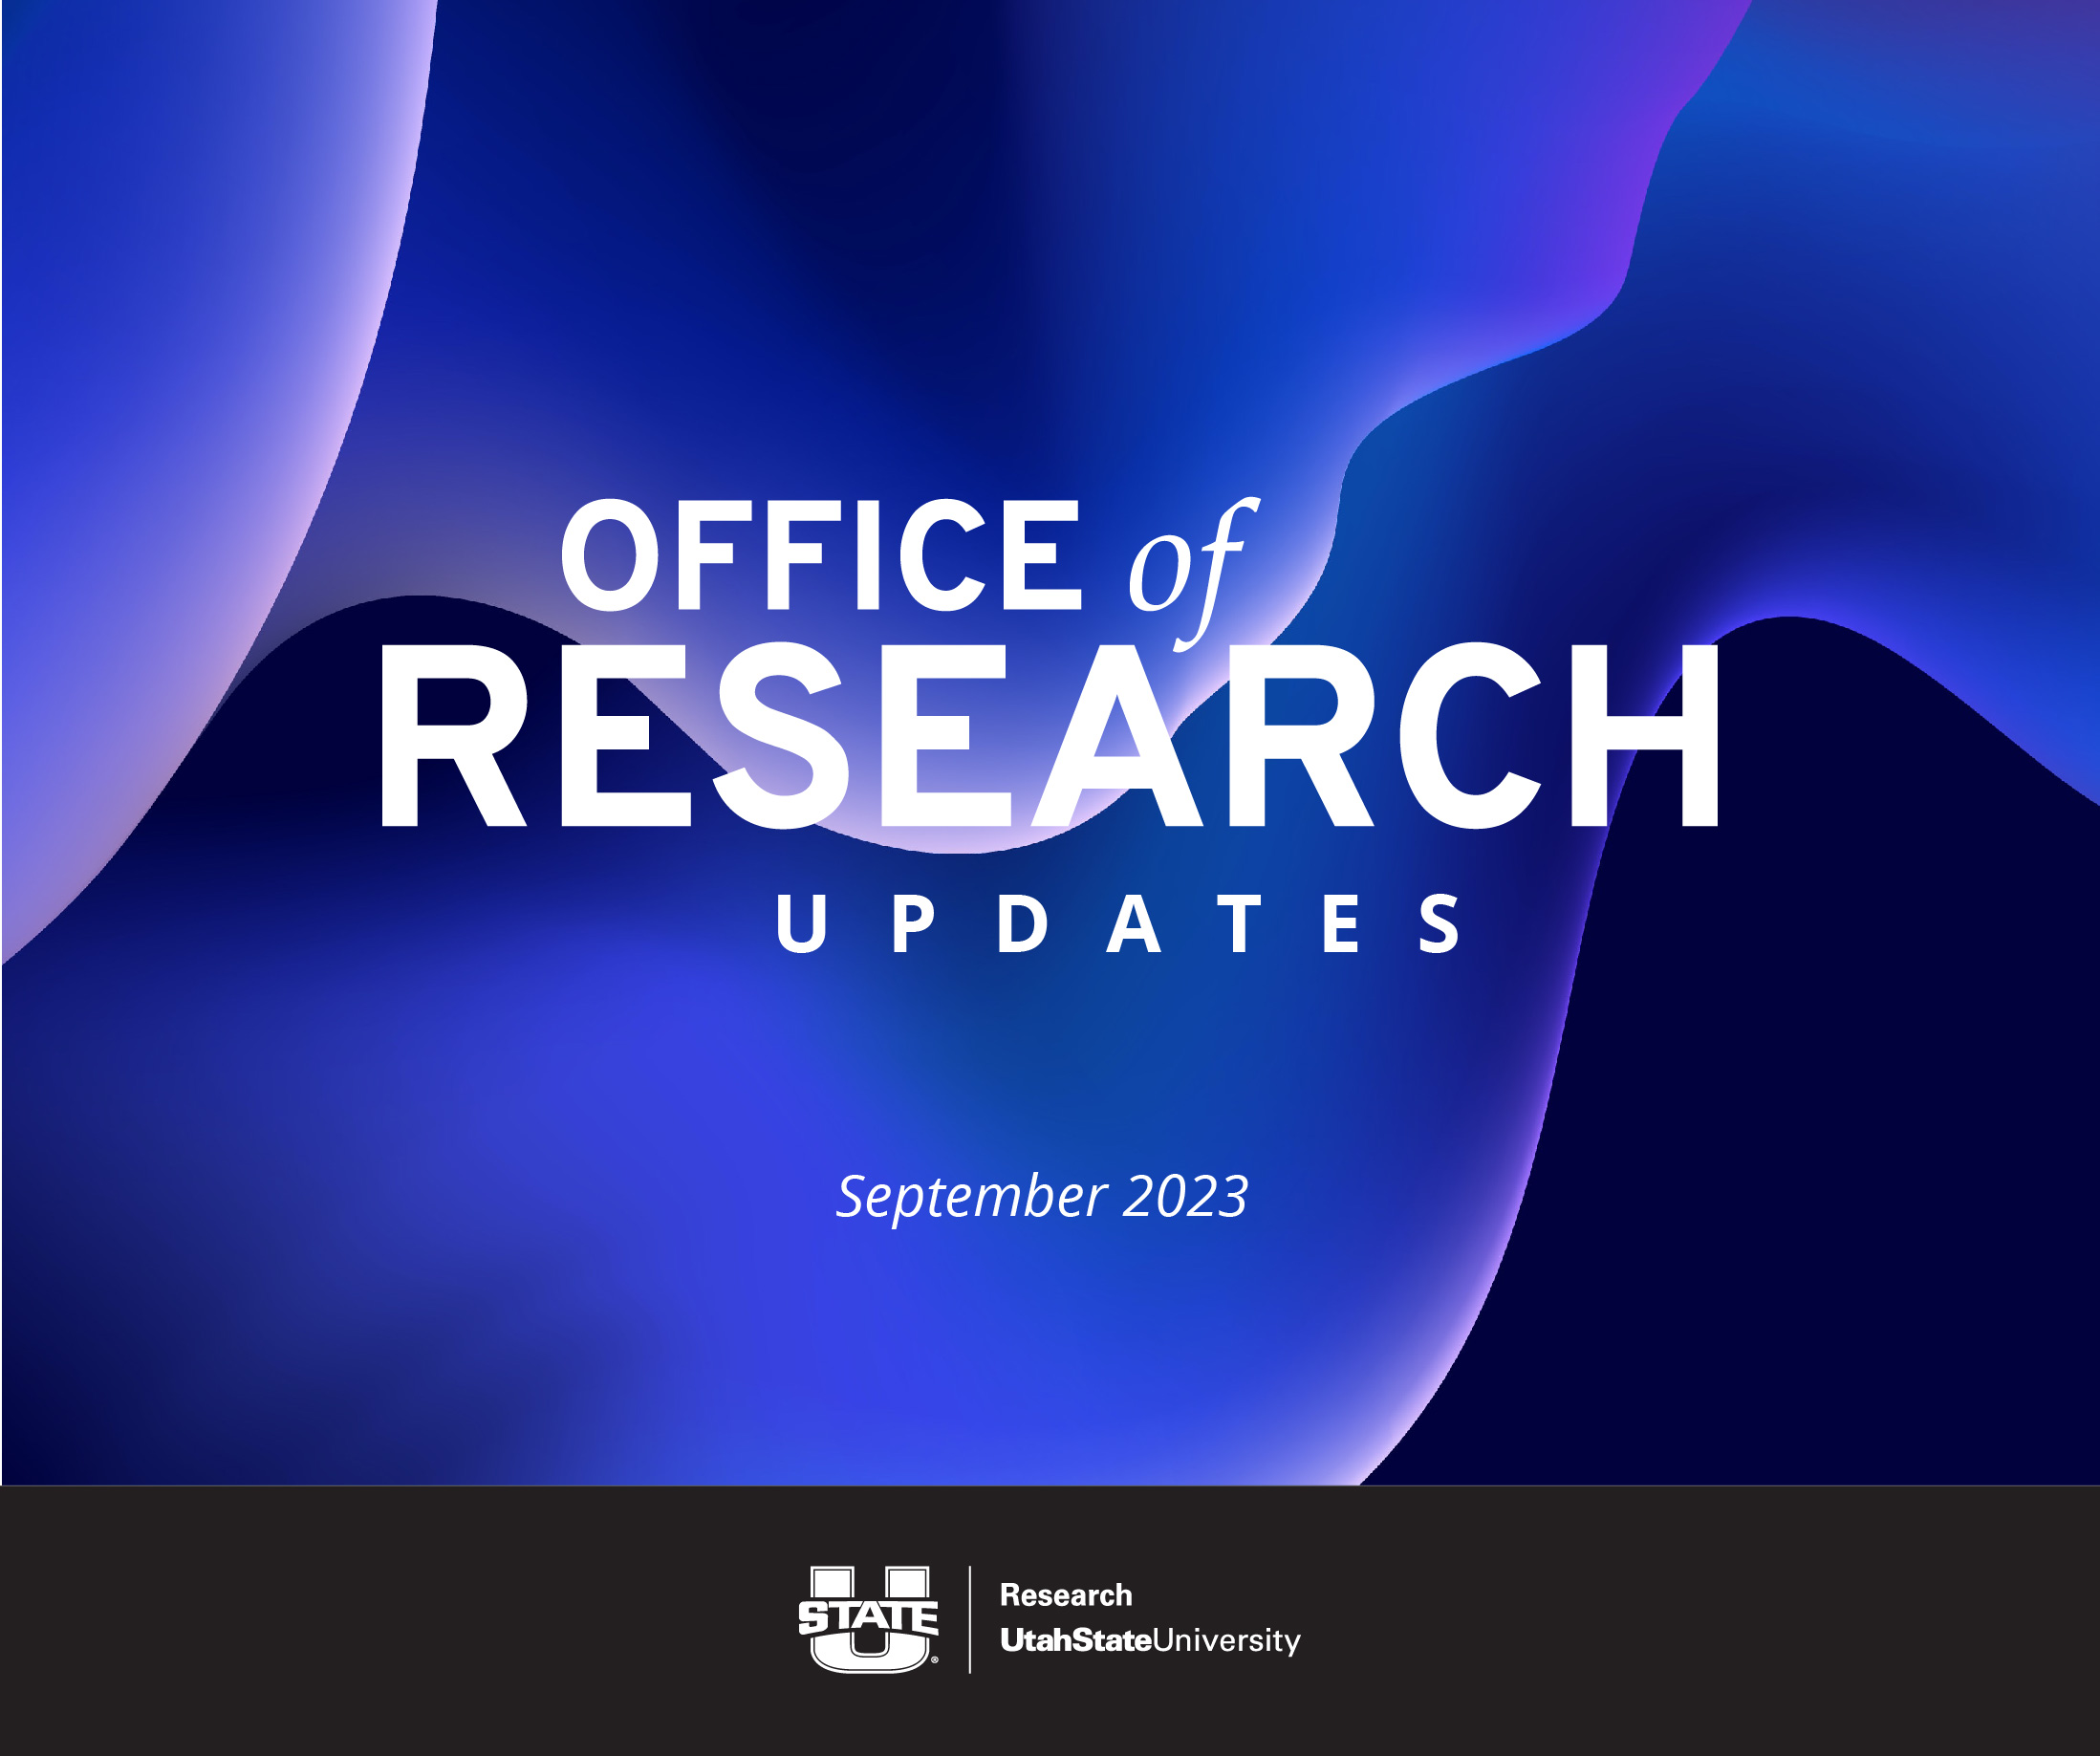 Office of Research Updates September 2023